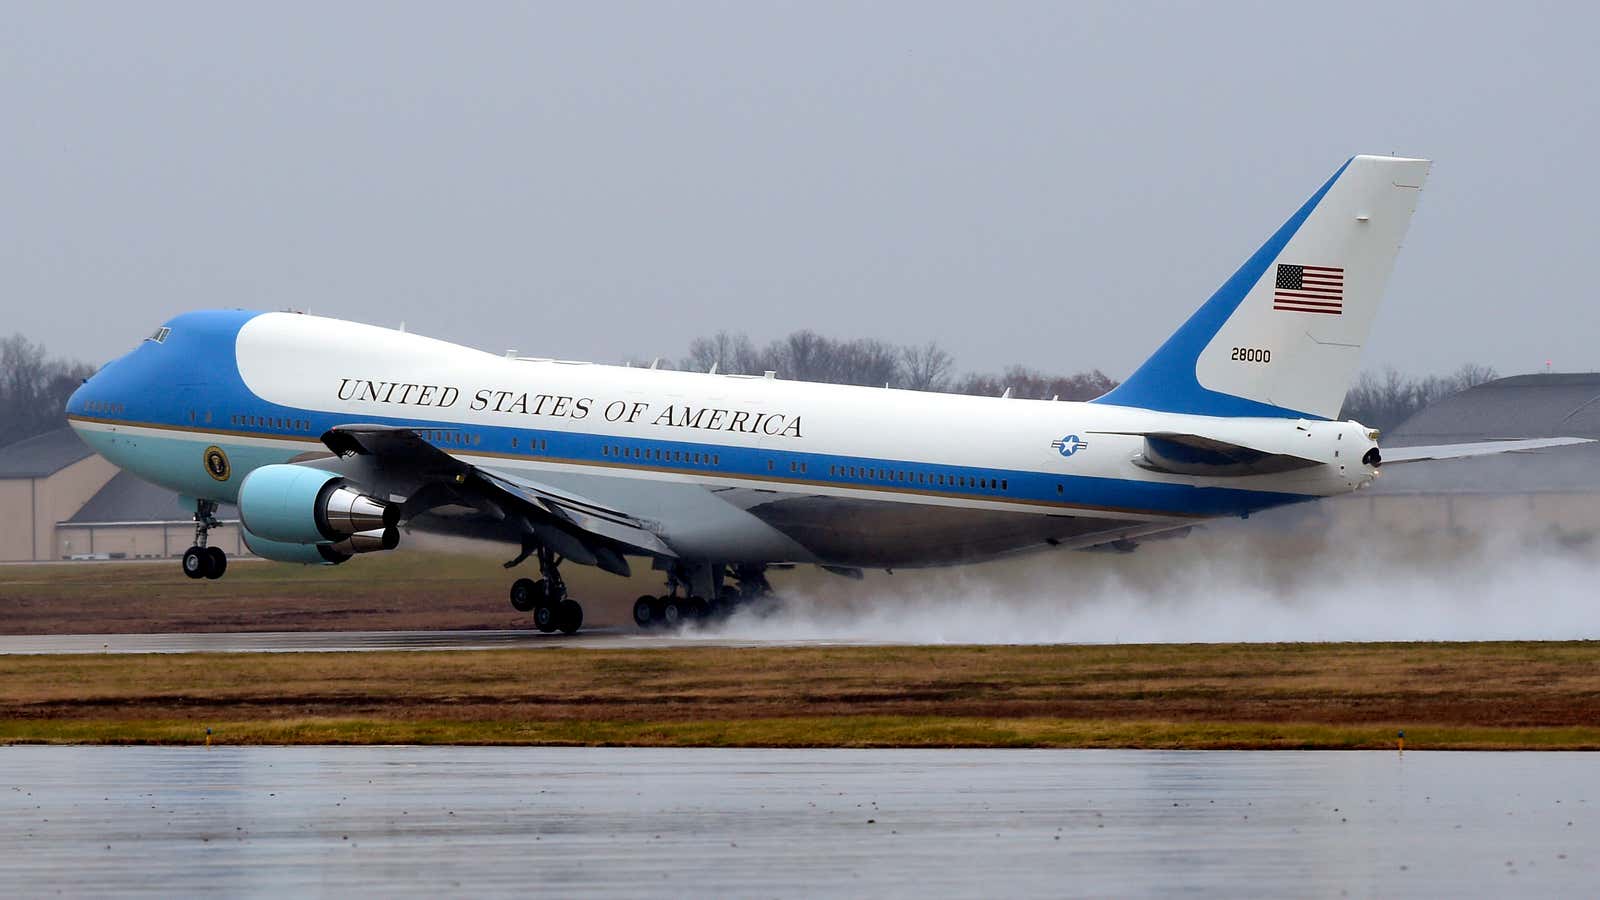 A very presidential plane indeed.